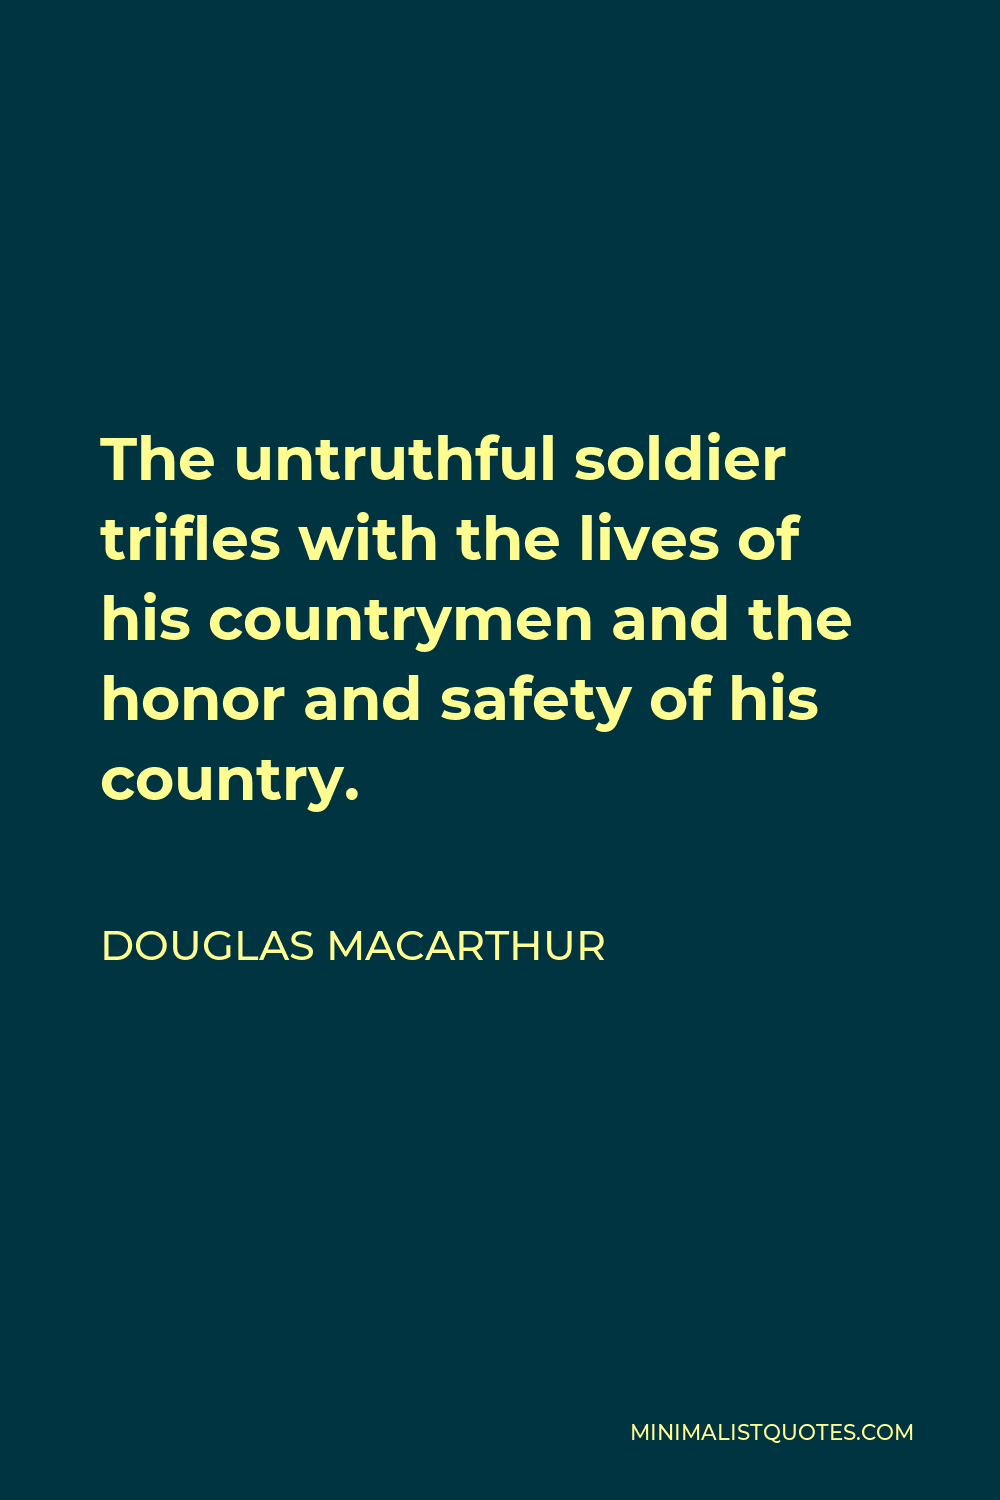 Douglas MacArthur Quote - The untruthful soldier trifles with the lives of his countrymen and the honor and safety of his country.